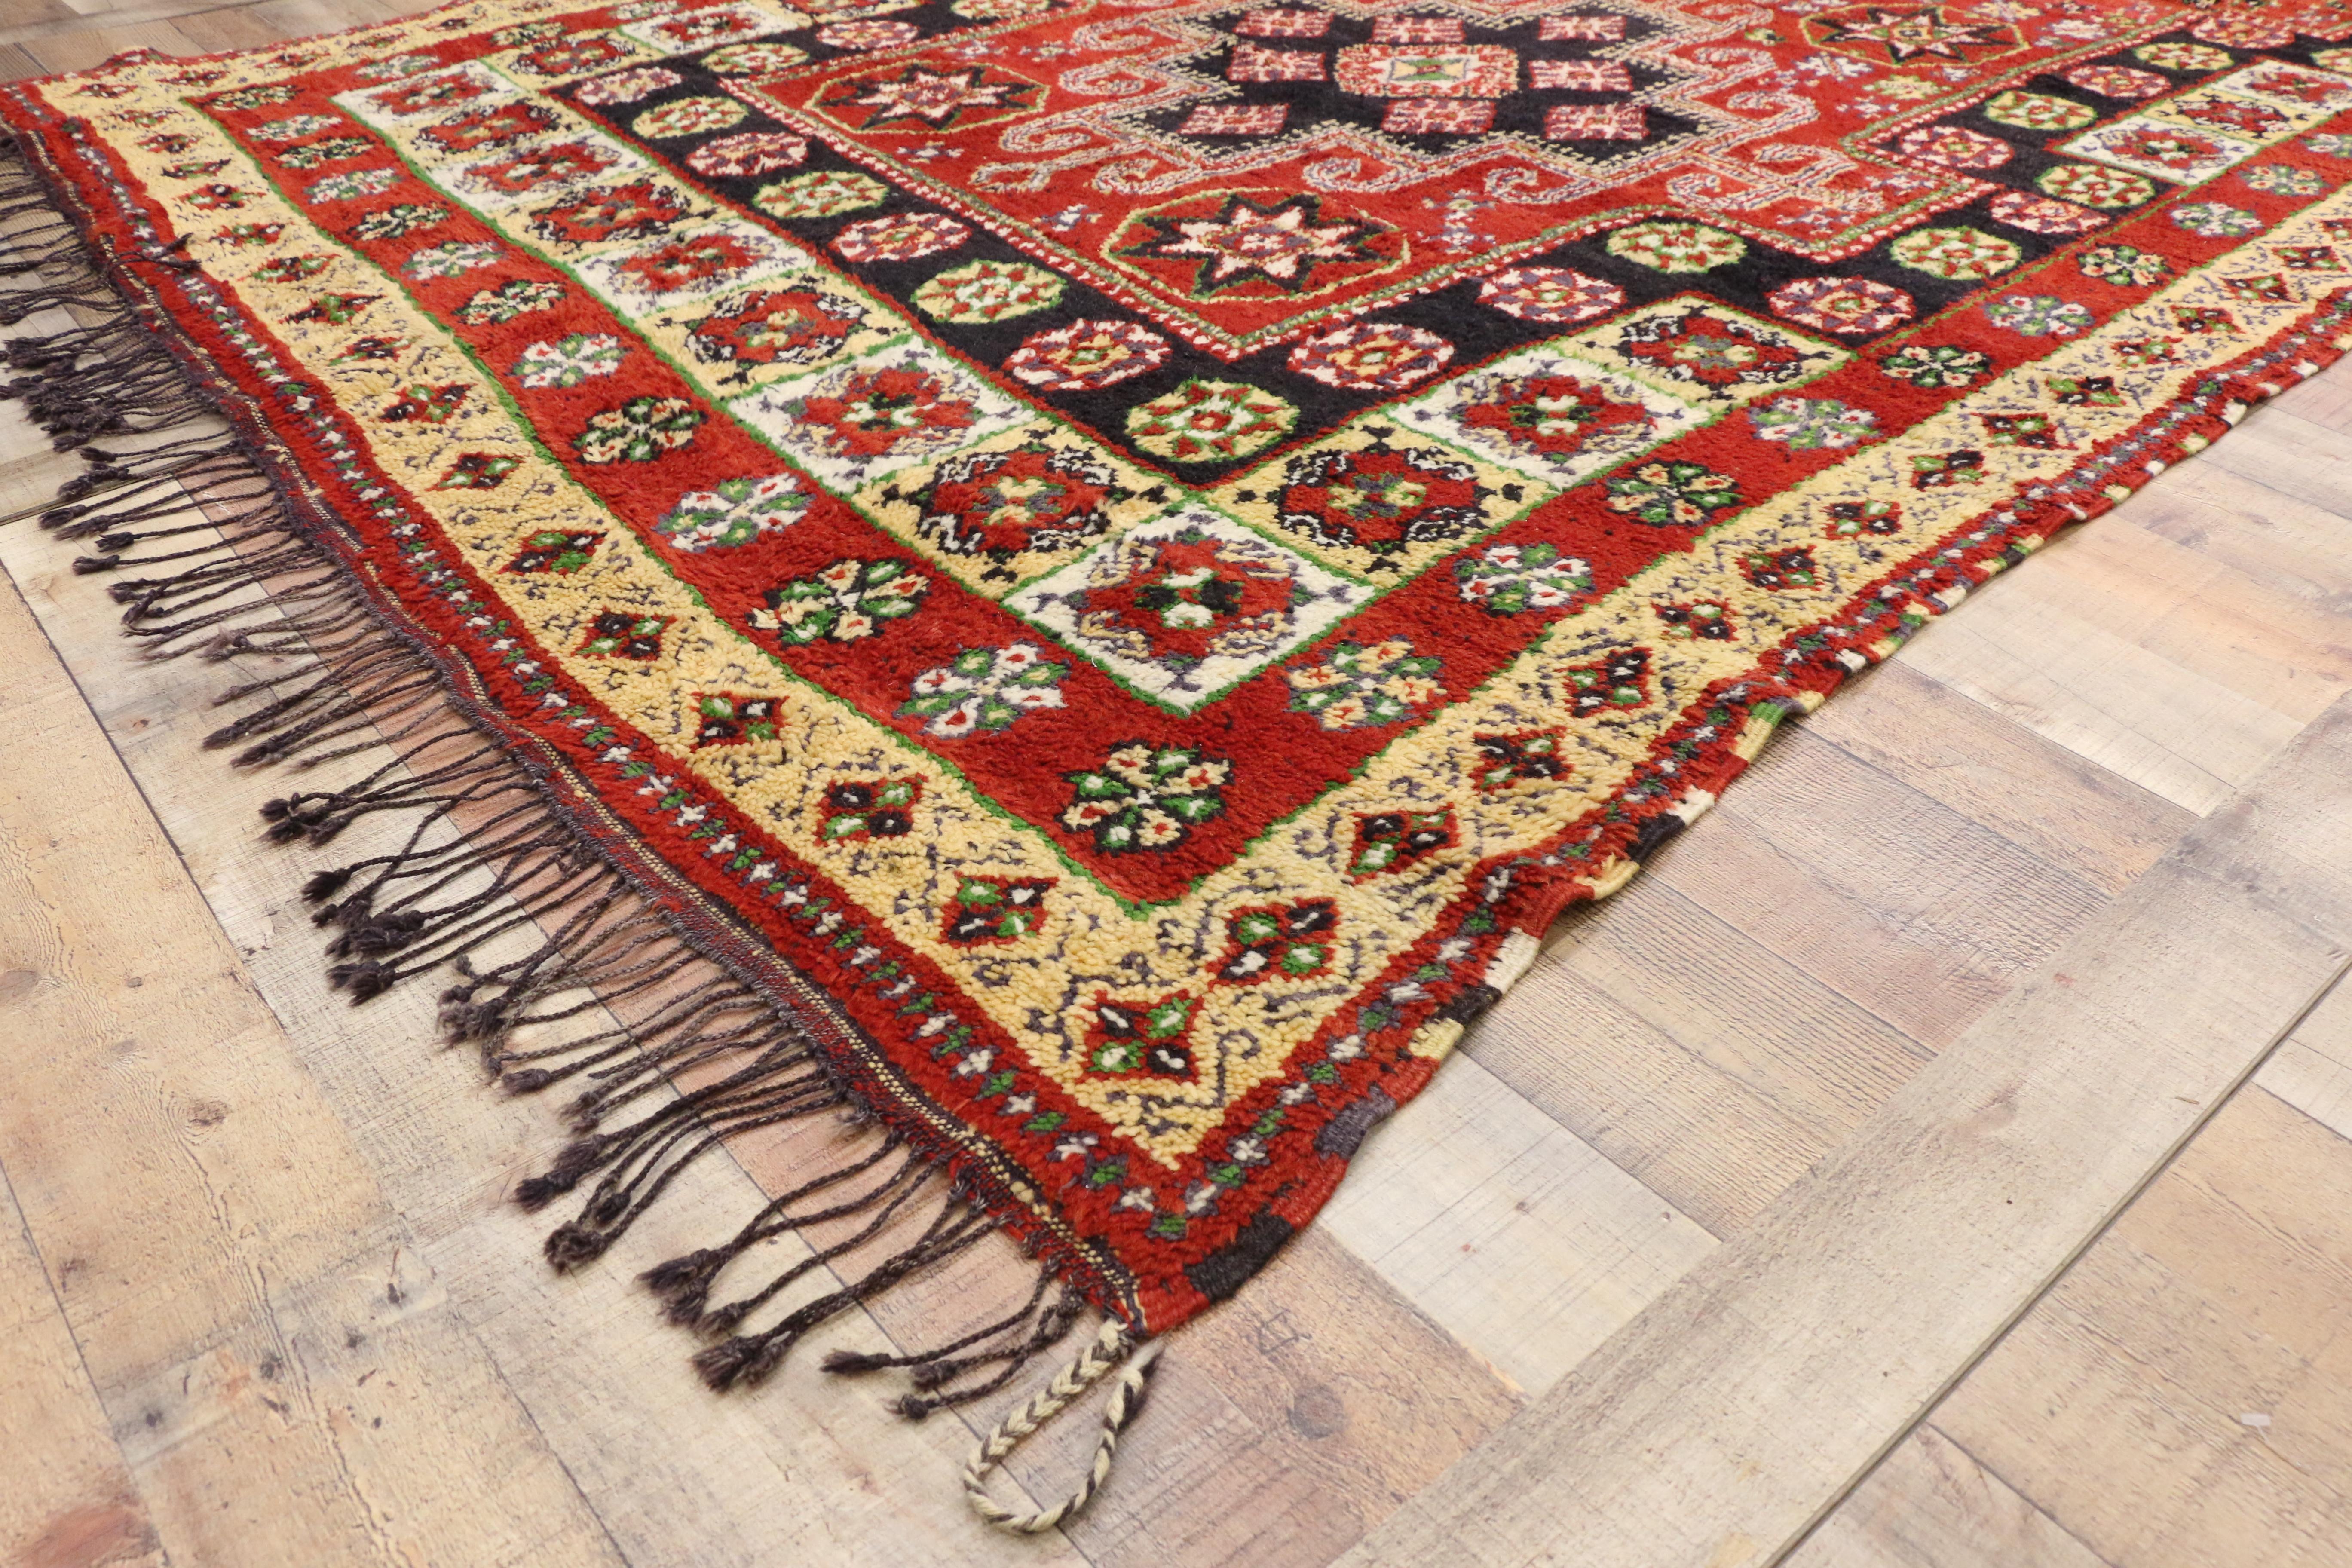 Vintage Rabat Moroccan Area Rug with Traditional Village Style In Good Condition For Sale In Dallas, TX